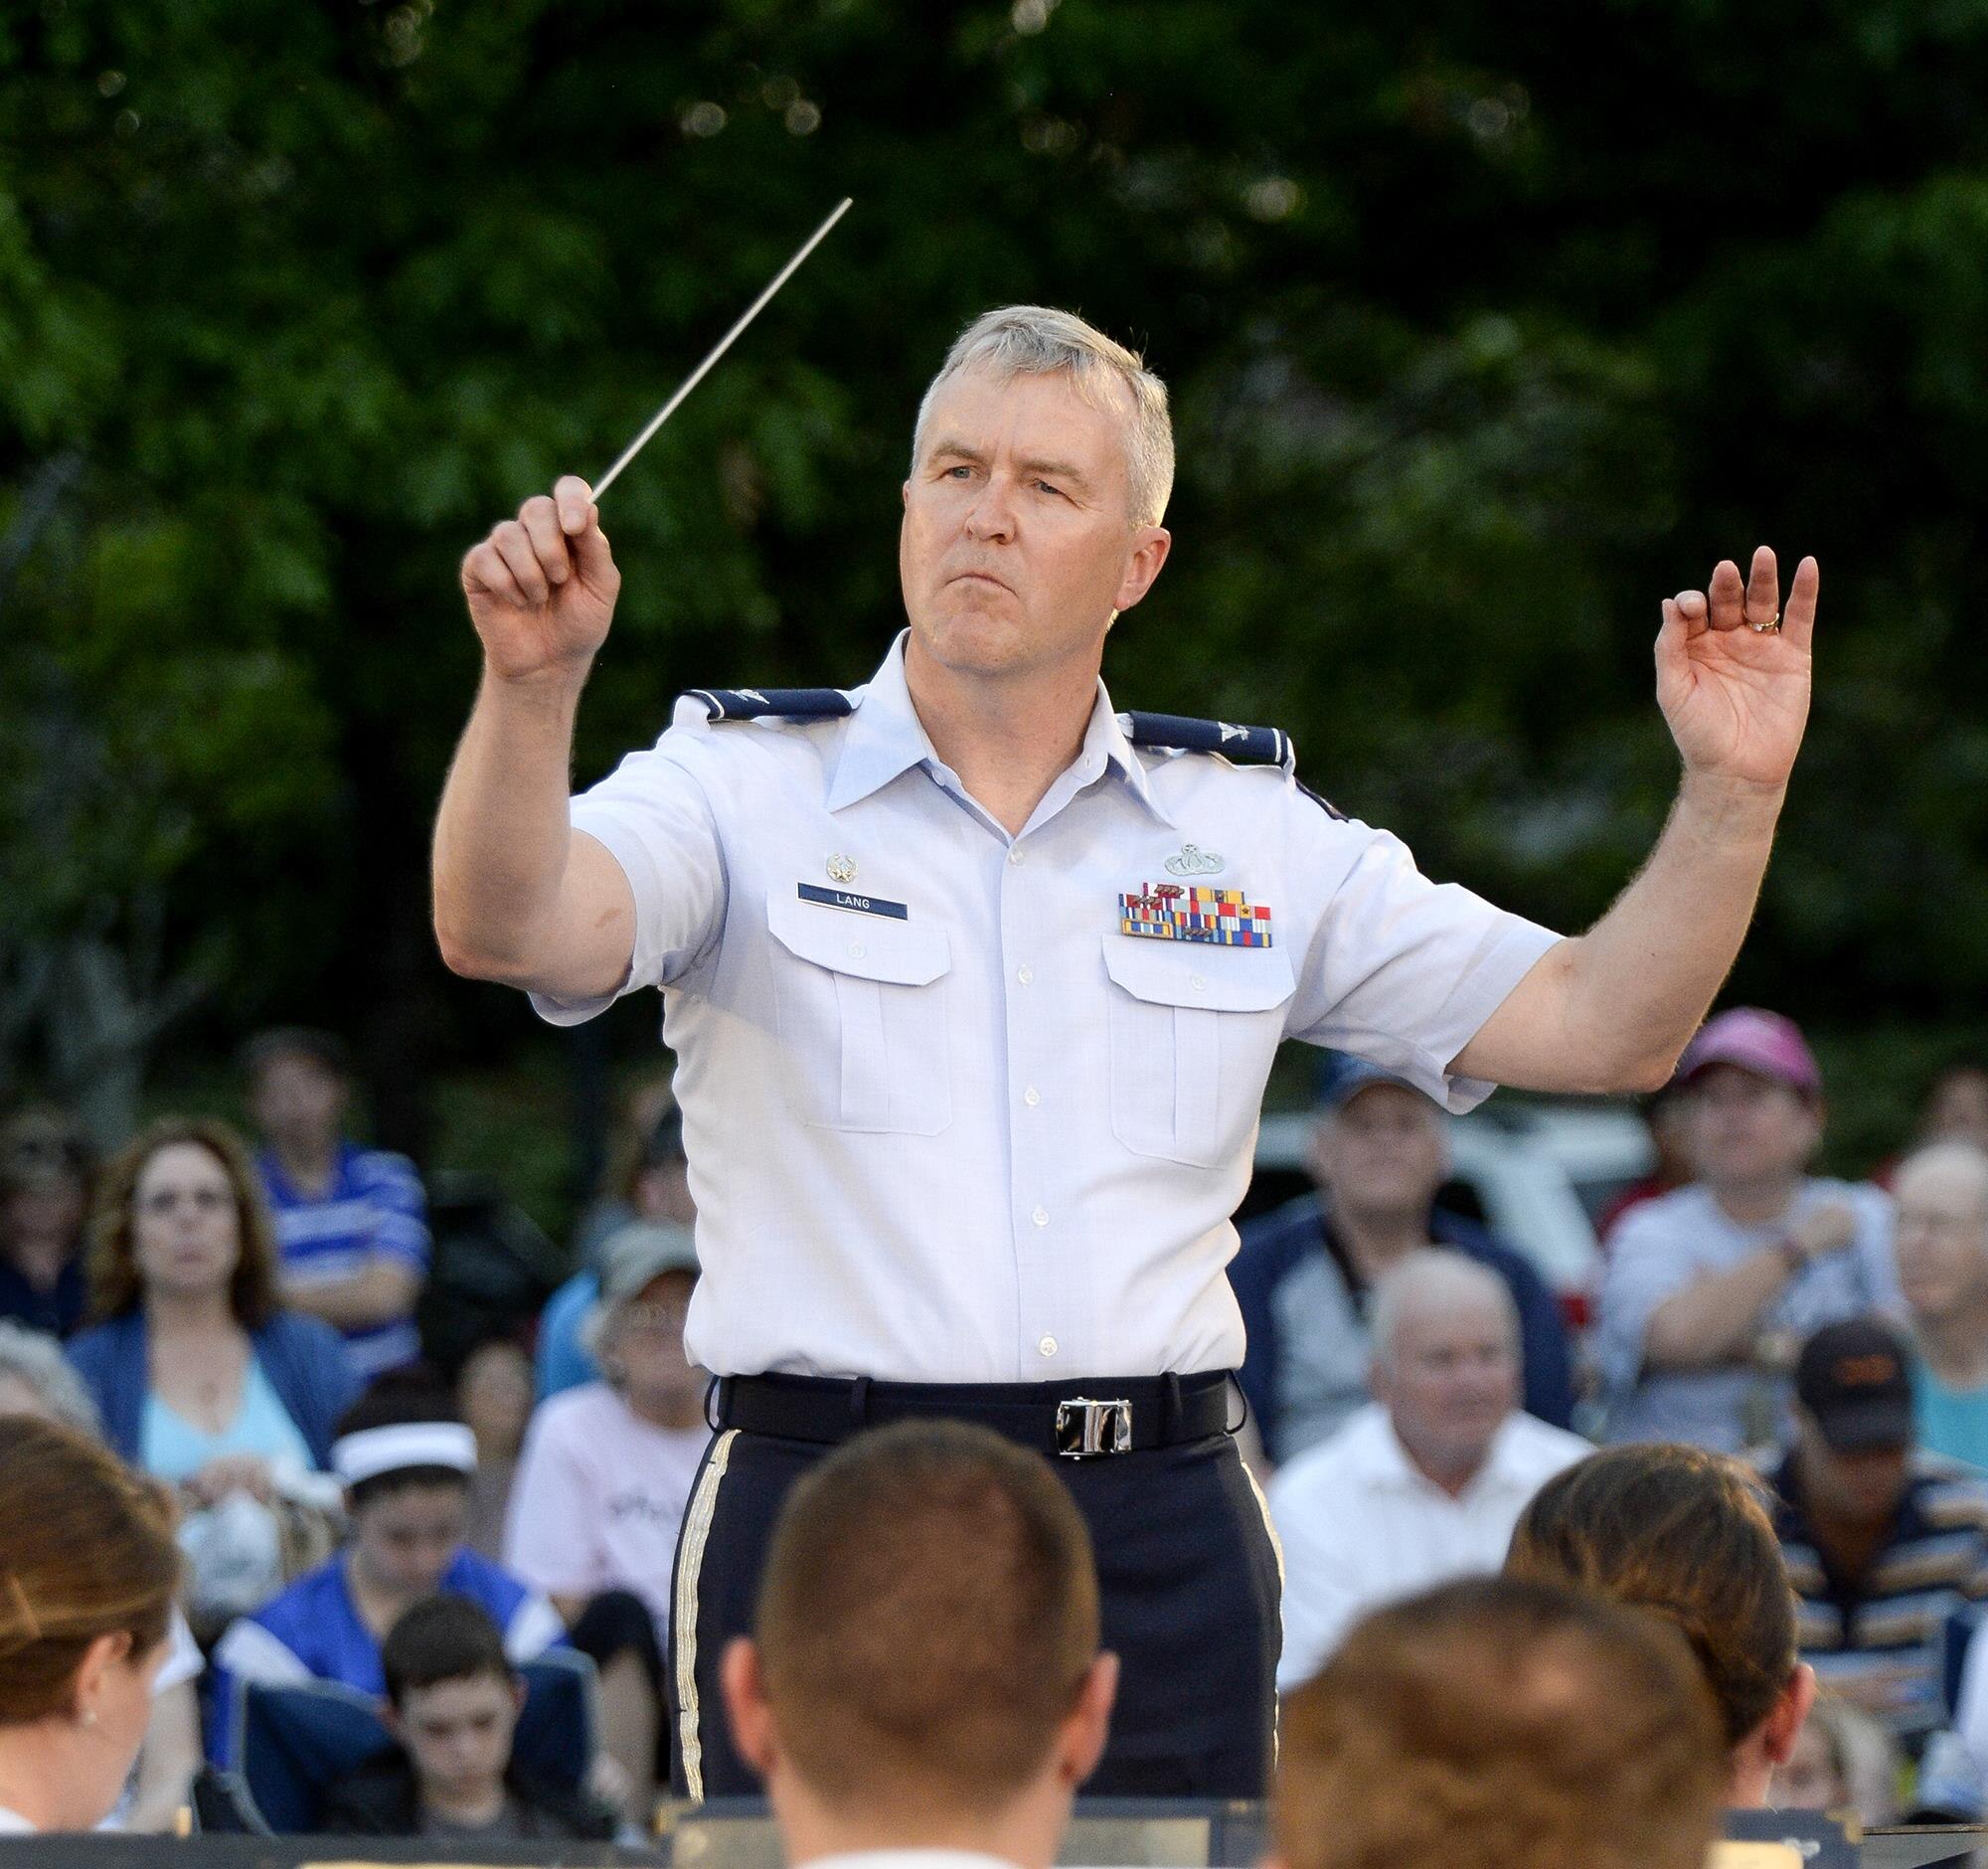 Col. Larry Lang, commander of the U.S. Air Force Band, conducts the inaugural performance of the 2015 U.S. Air Force Band Summer Concert Series at the Air Force Memorial in Arlington, Va., May 29, 2015. (U.S. Air Force photo/Andy Morataya)